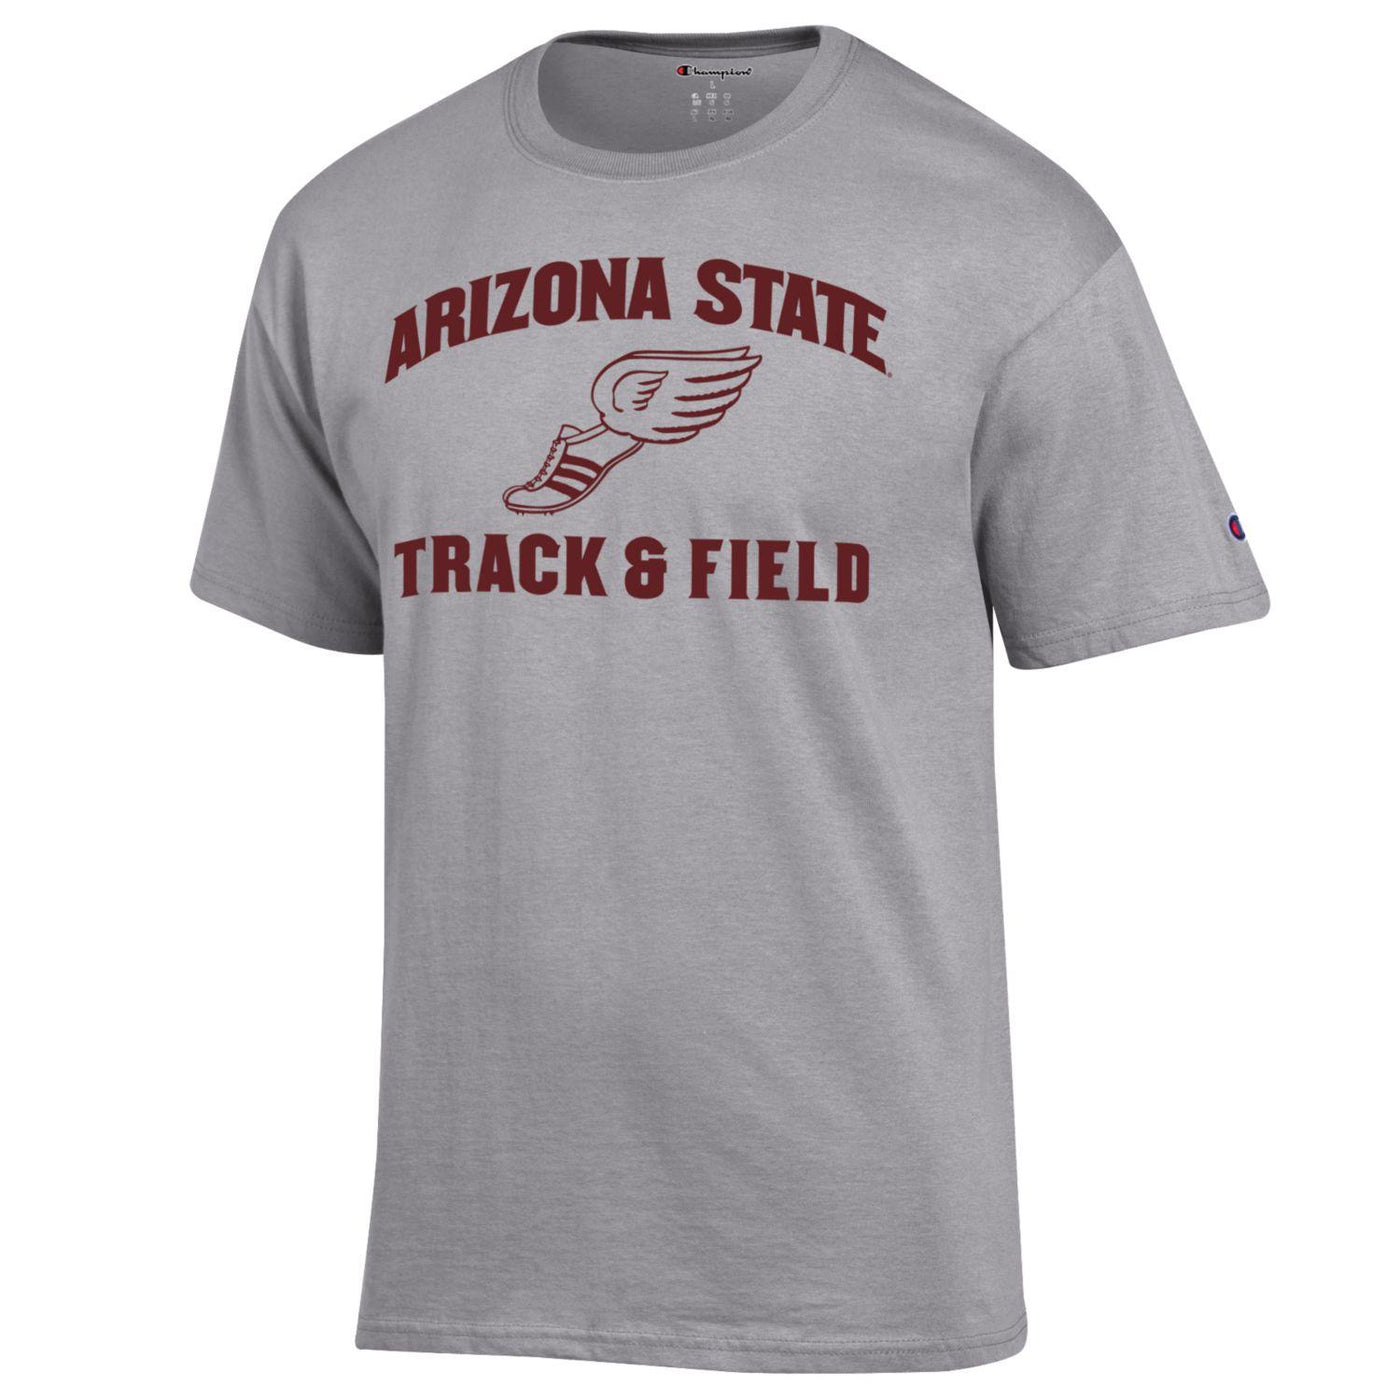 ASU gray champion tee with Arizona State Track and field written around track shoe with wing on chest.